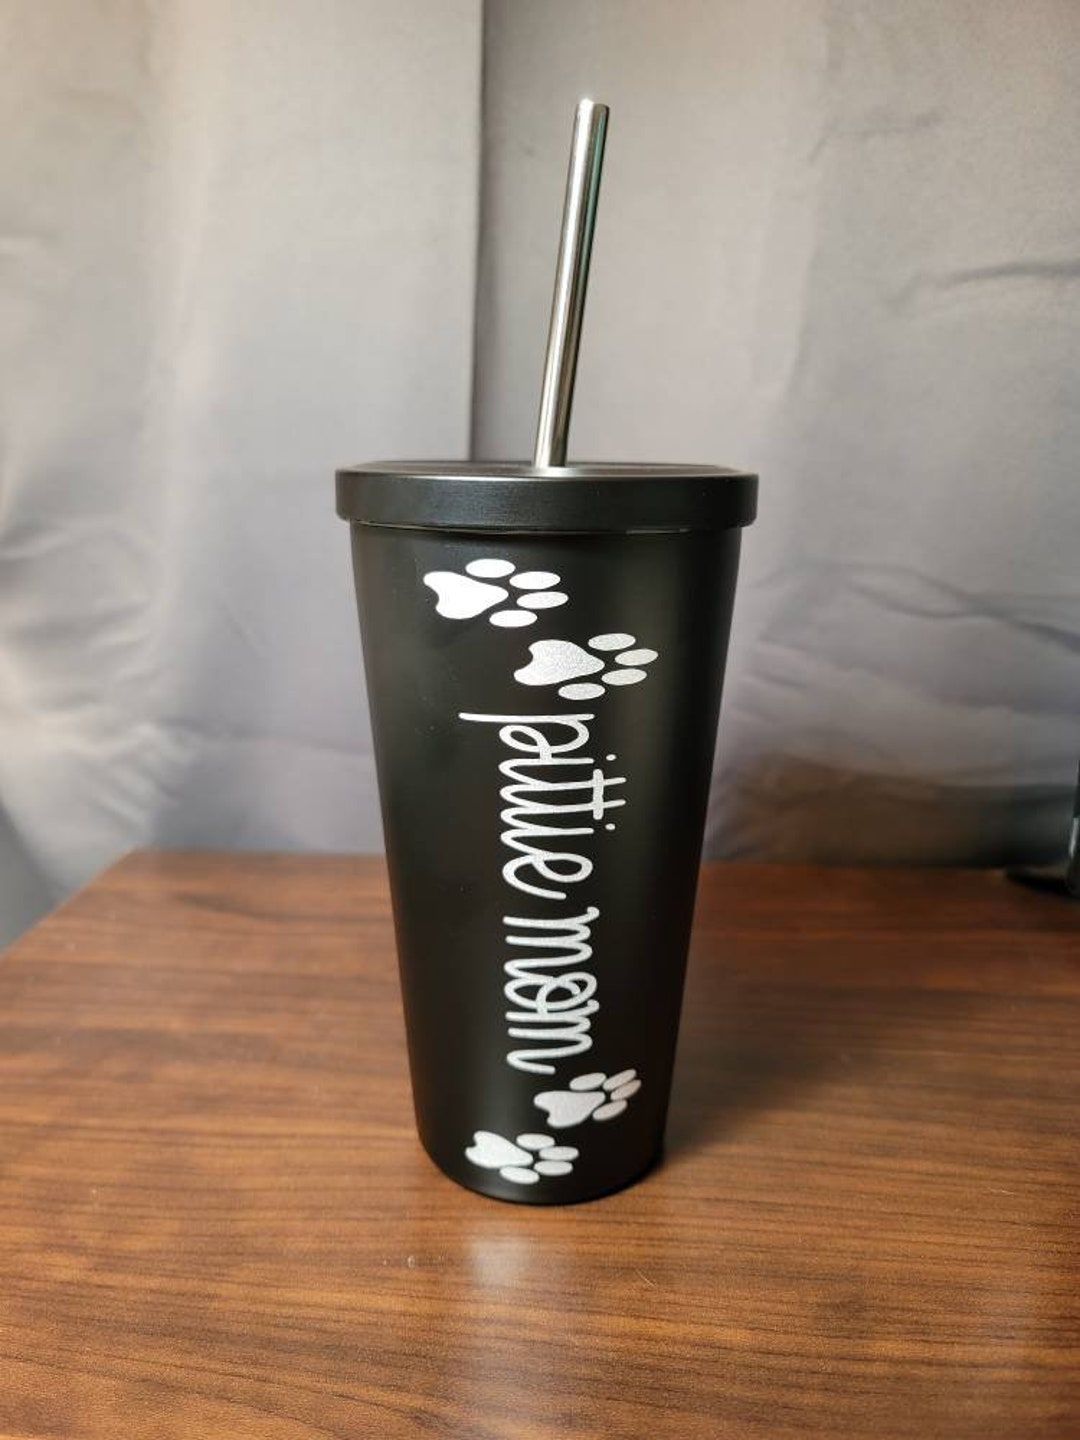 18.5oz. Black Stainless Steel Tumbler by Celebrate It